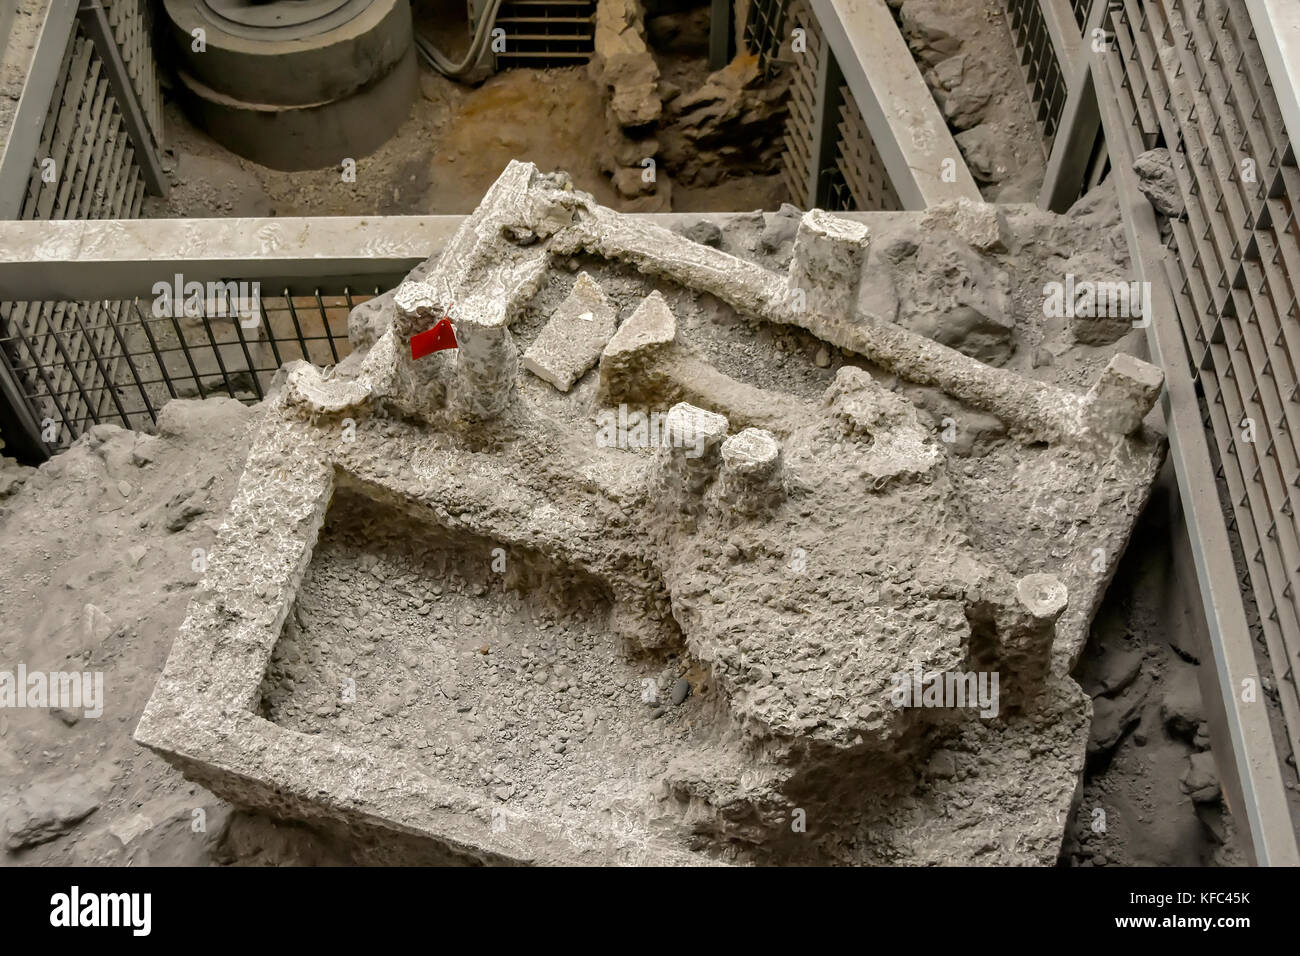 Akrotiri Minoan archaeolgical site showing two beds upside down made of plaster casts at Santorini, Cyclades, Aegean Sea, Greece. Stock Photo